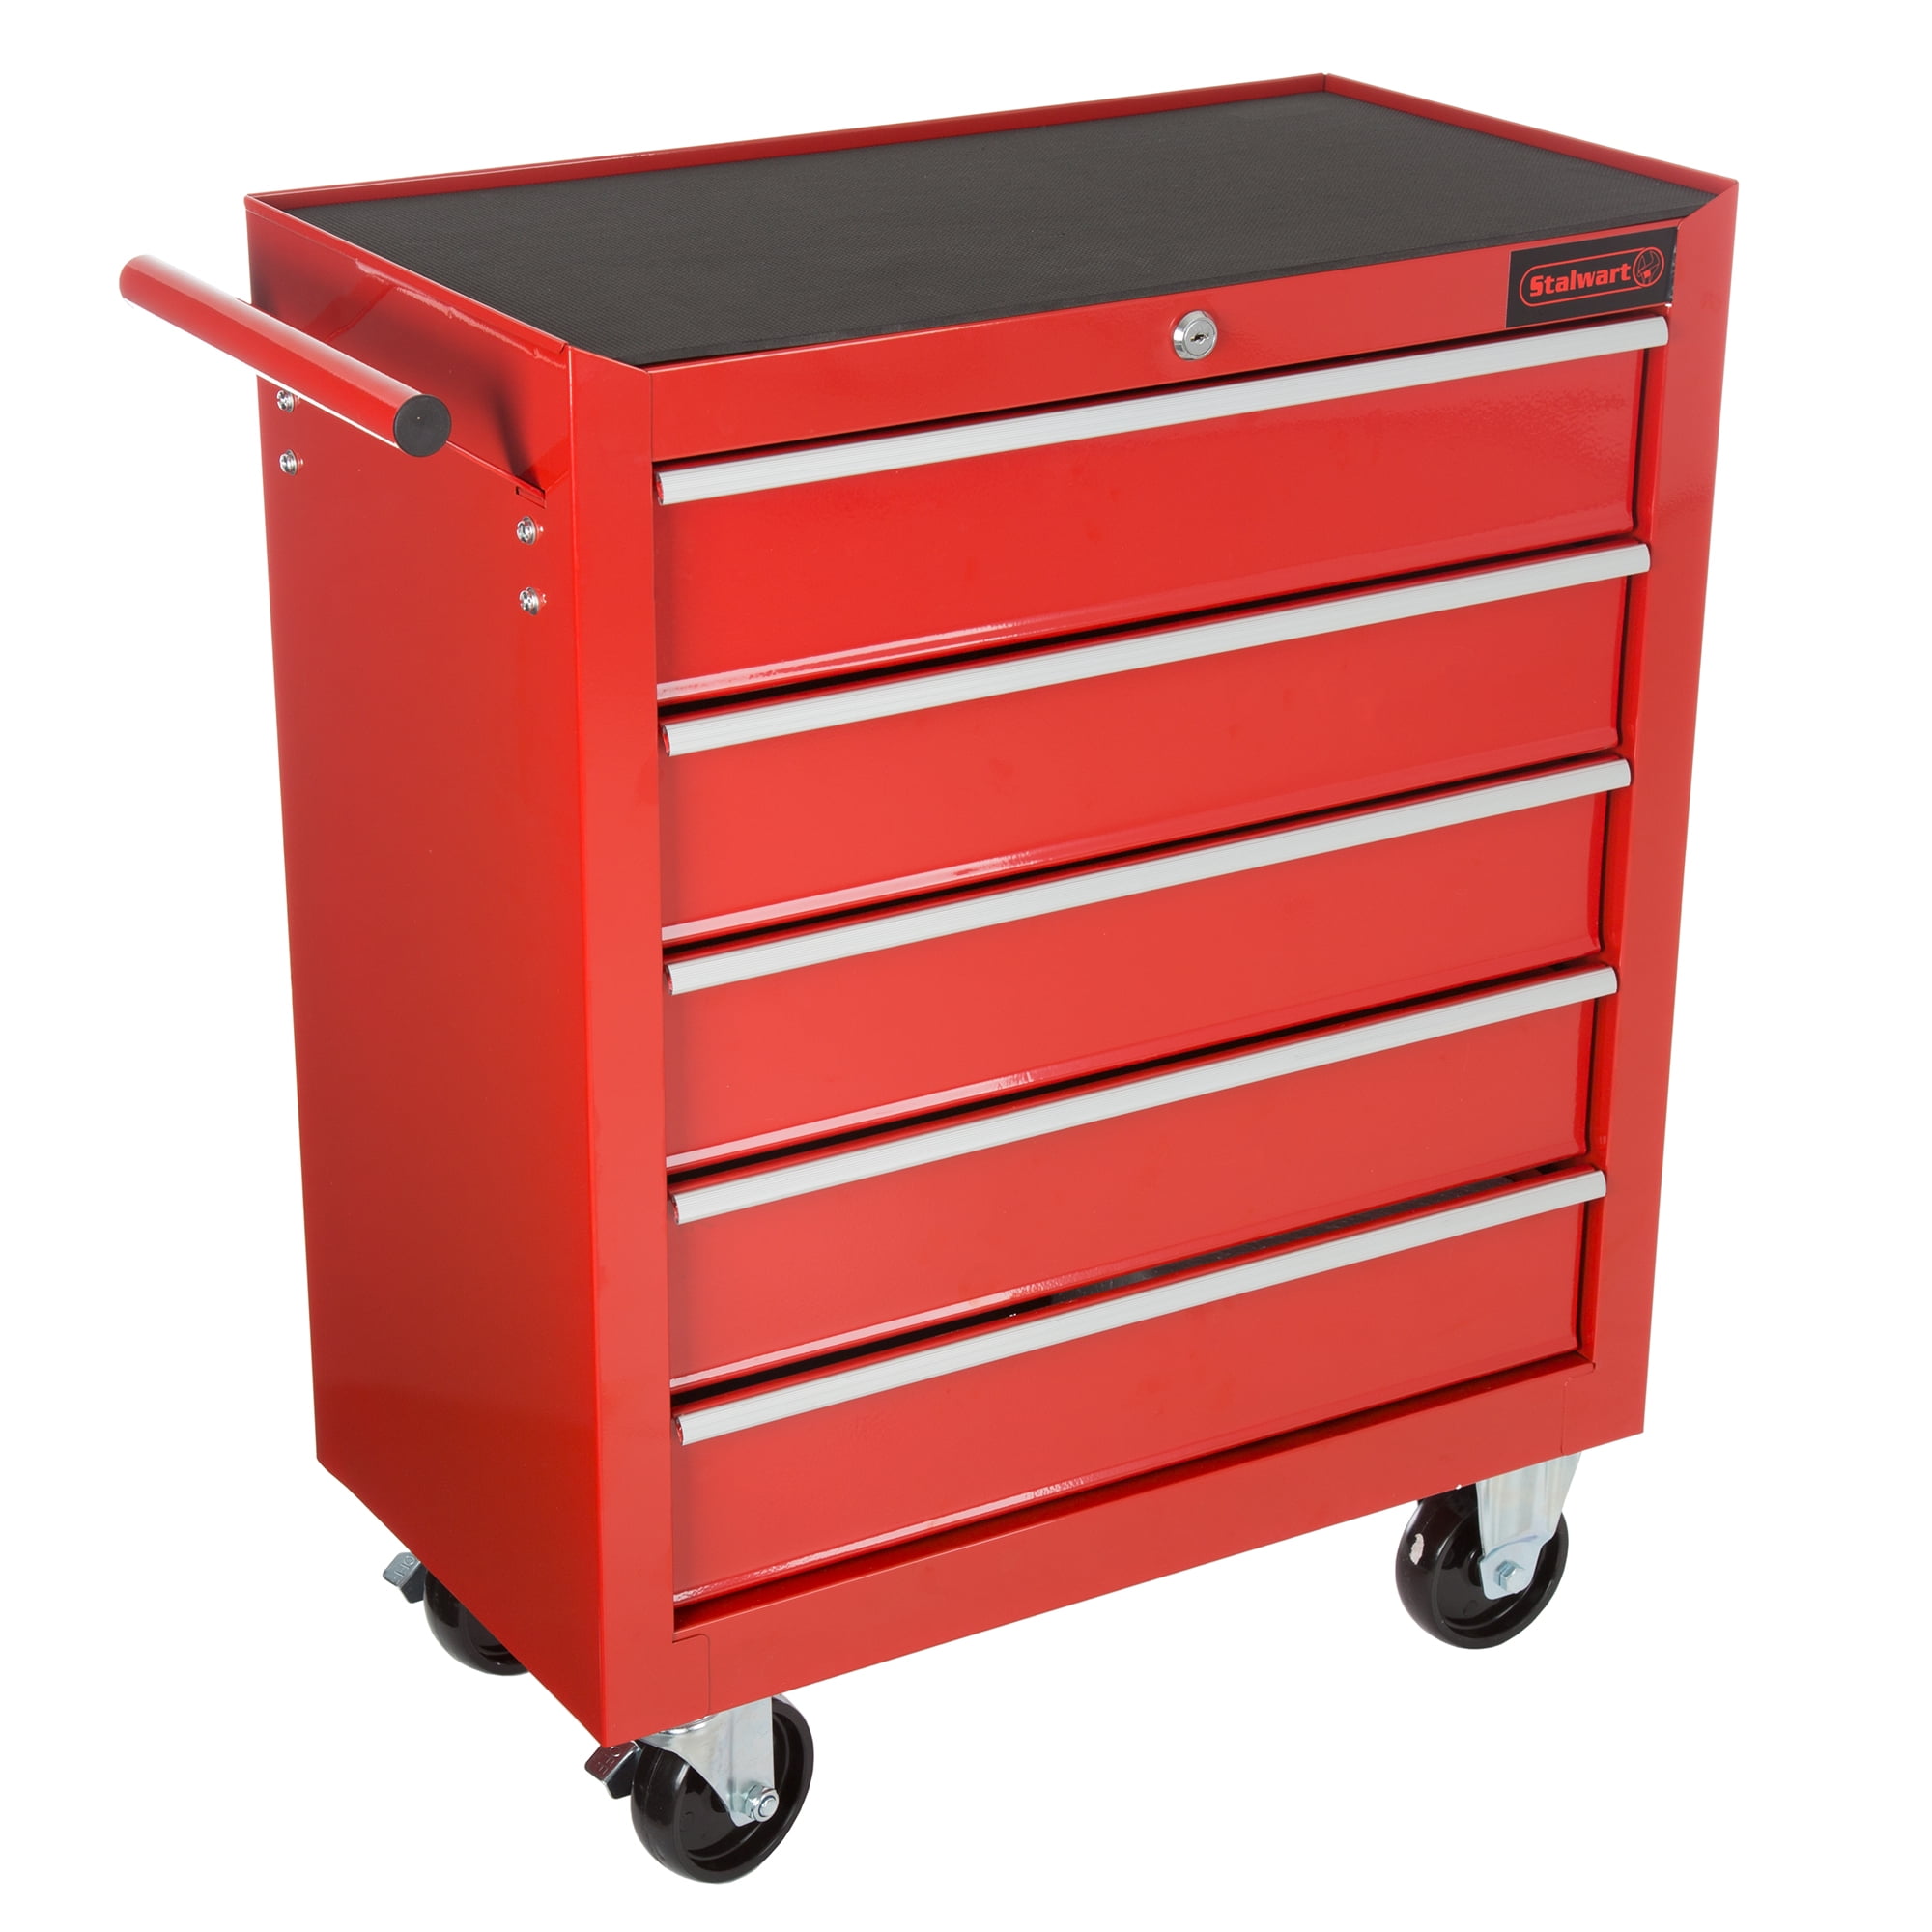 Rolling Tool Box Cabinet 5 Drawer Portable Storage Chest Tools